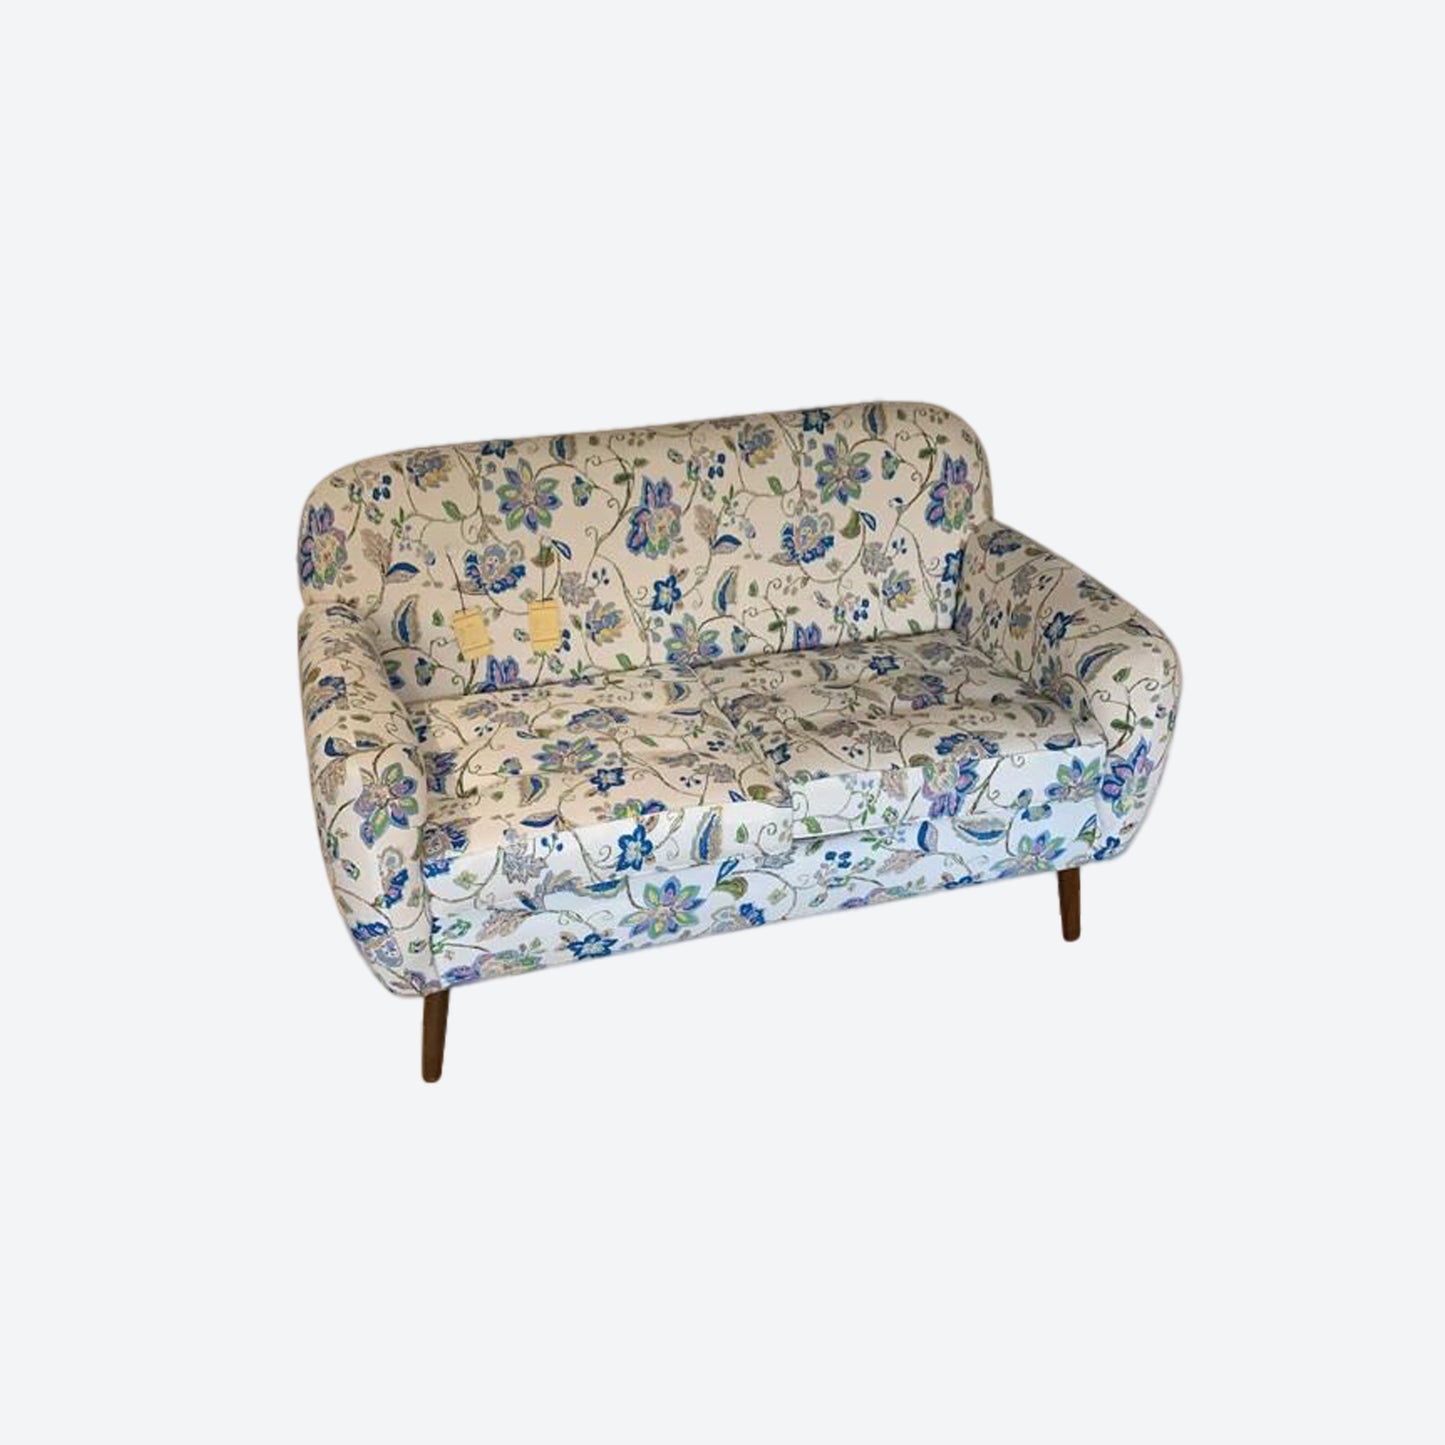 Organic CANVAS Fabric TWO SEATER SOFA WITH FLORAL PATTERN AND CEDAR WOOD LEGS -SK (SKU 1121)